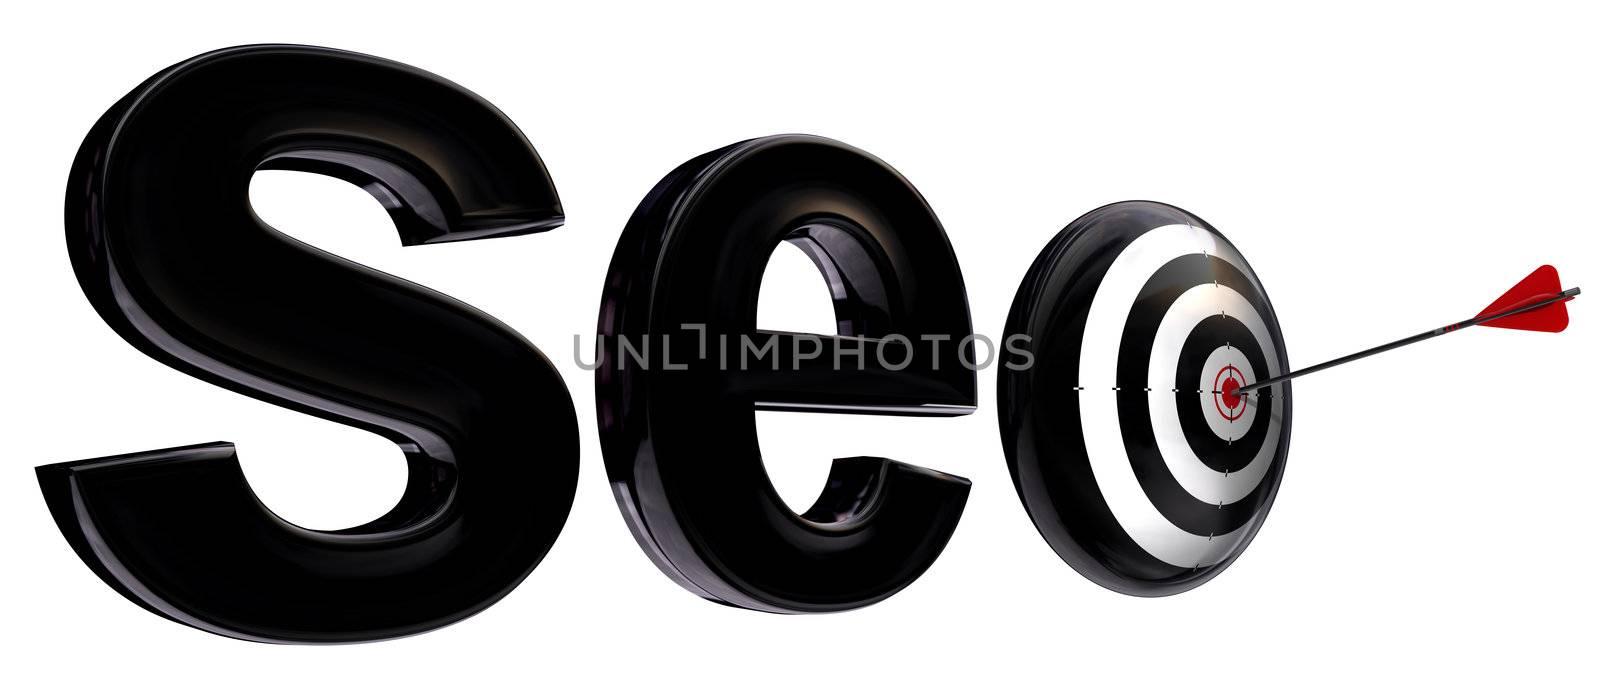 seo 3d word and target with arrow isolated on white background